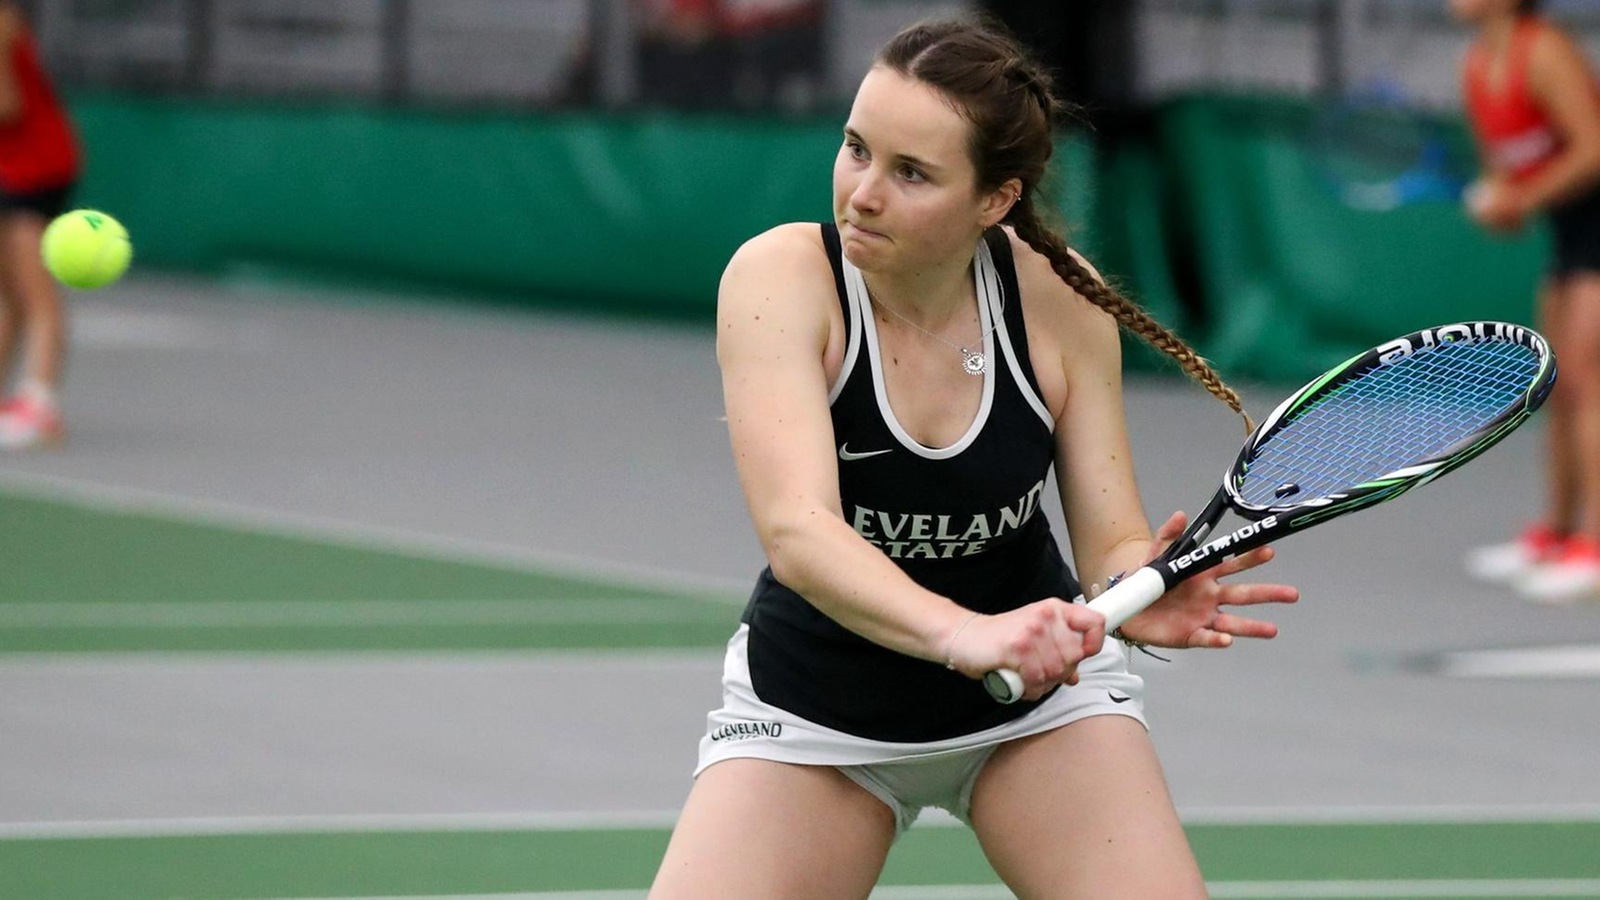 Vasilescu & Lenoan Pick Up Wins As Vikings Fall To Youngstown State, 5-2